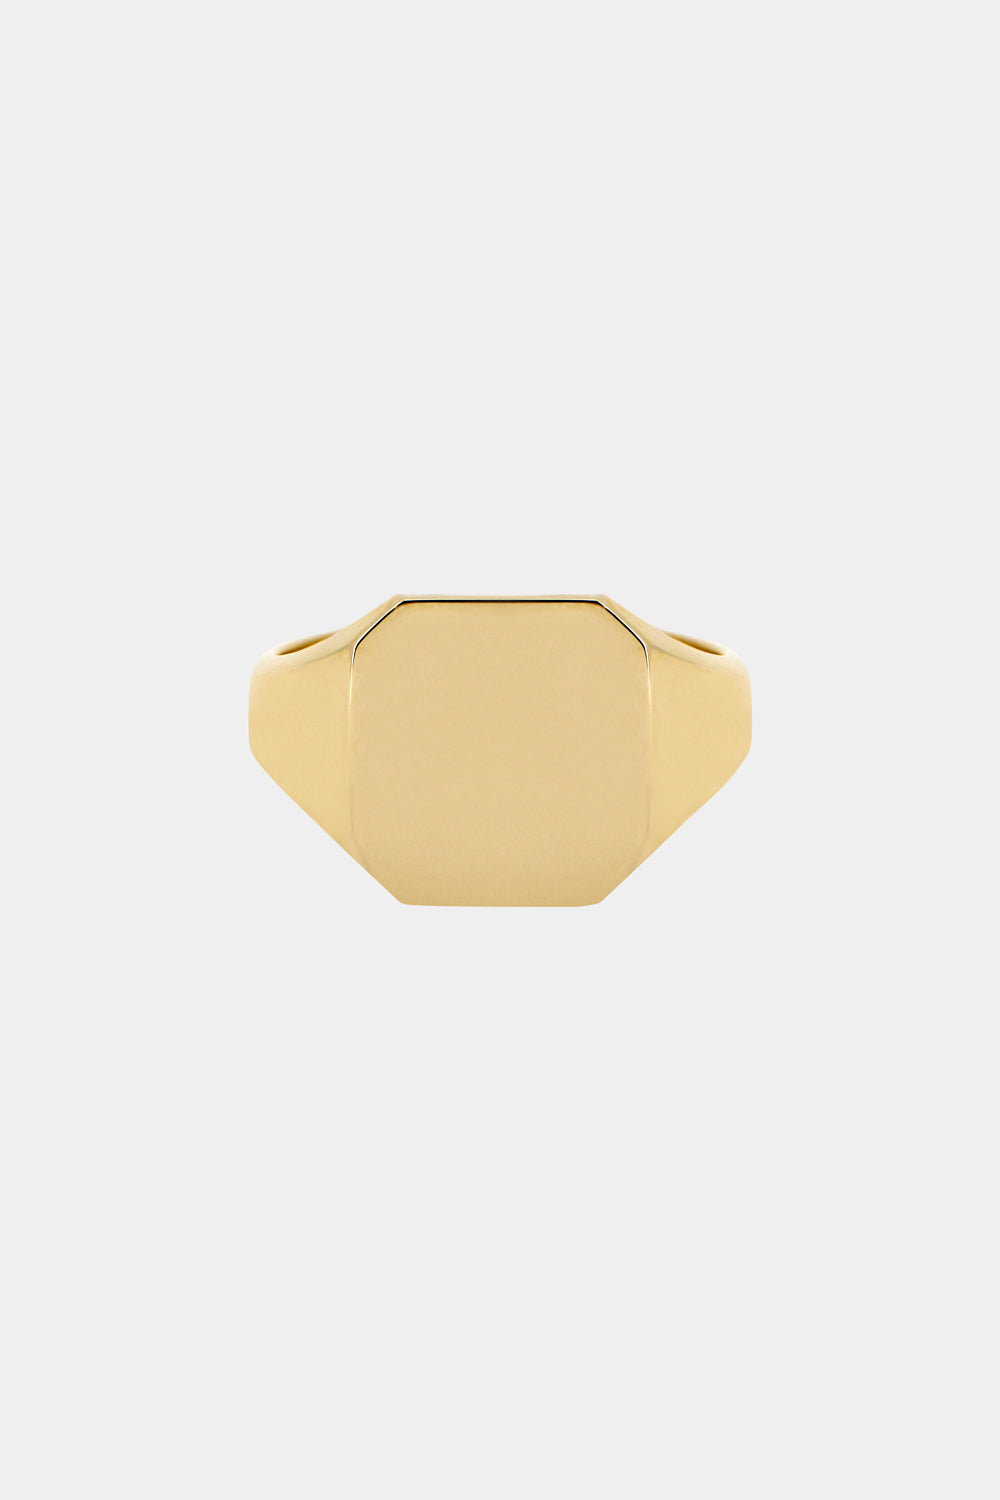 Tallows Signet Ring | Yellow Gold, More Options Available